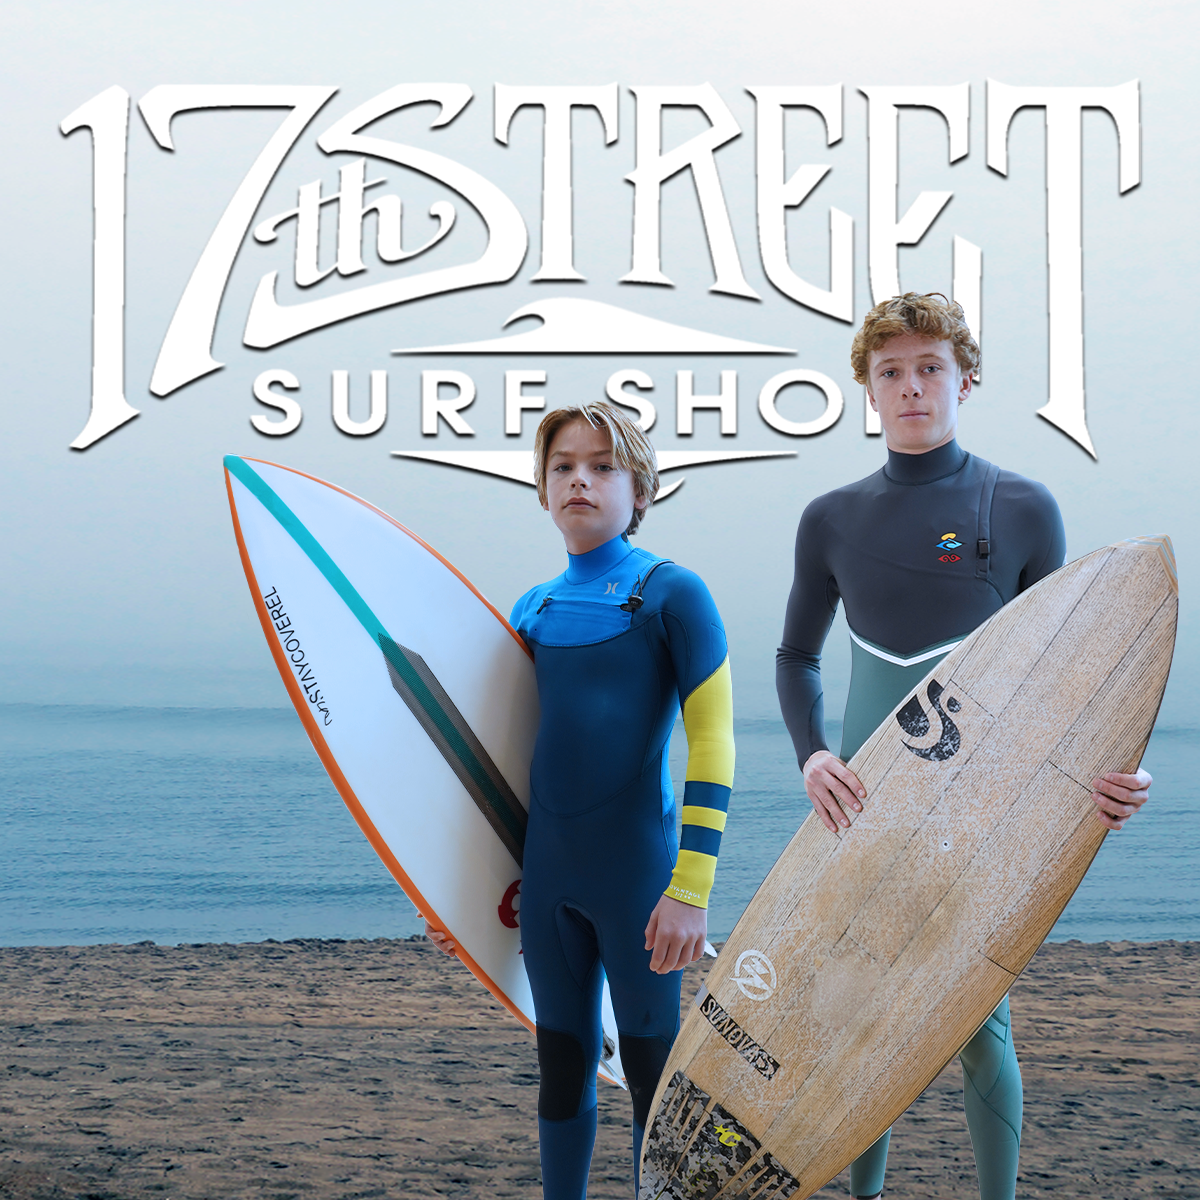 17th Street Surf Shop: Surf, Skate, & Style Since 1970